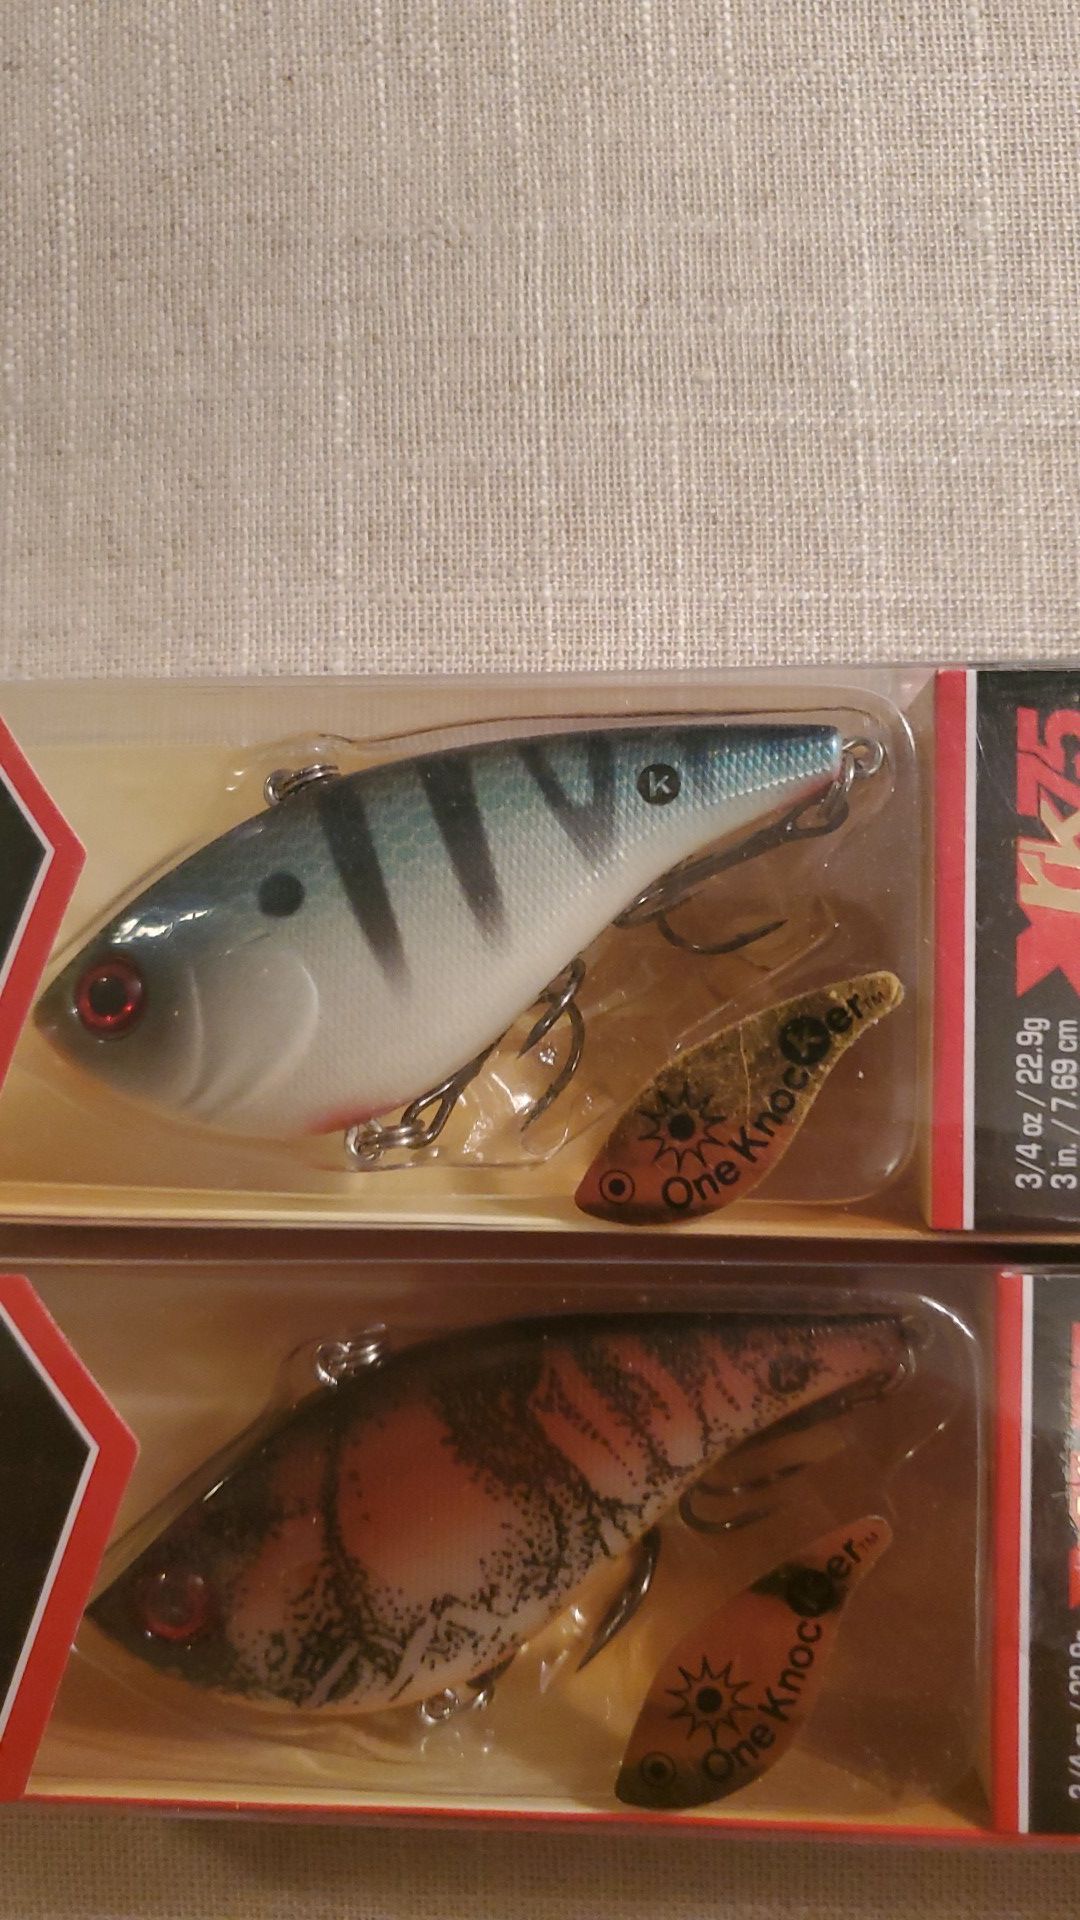 Fishing lures - 4 xcalibur lipless crankbaits for Sale in Hinckley